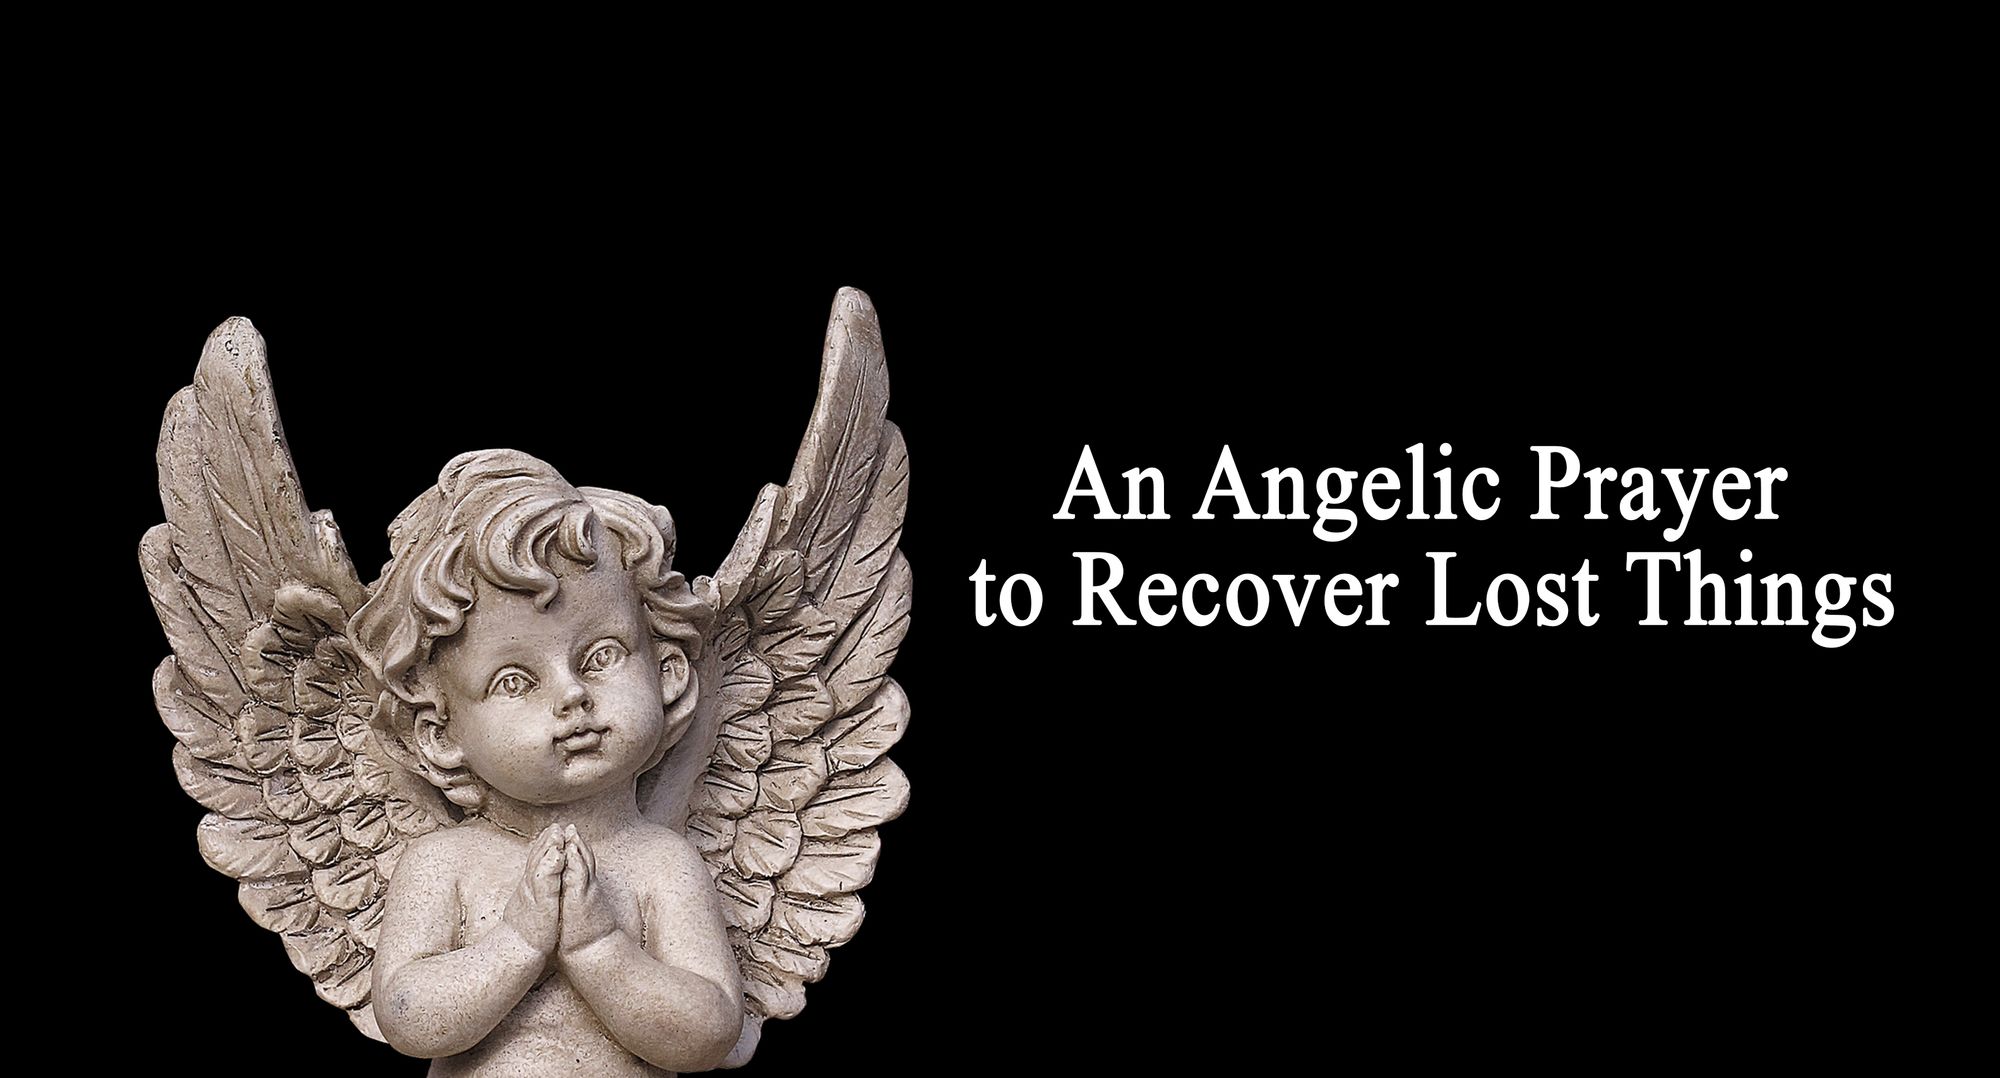 An Angelic Prayer to Recover Lost Things